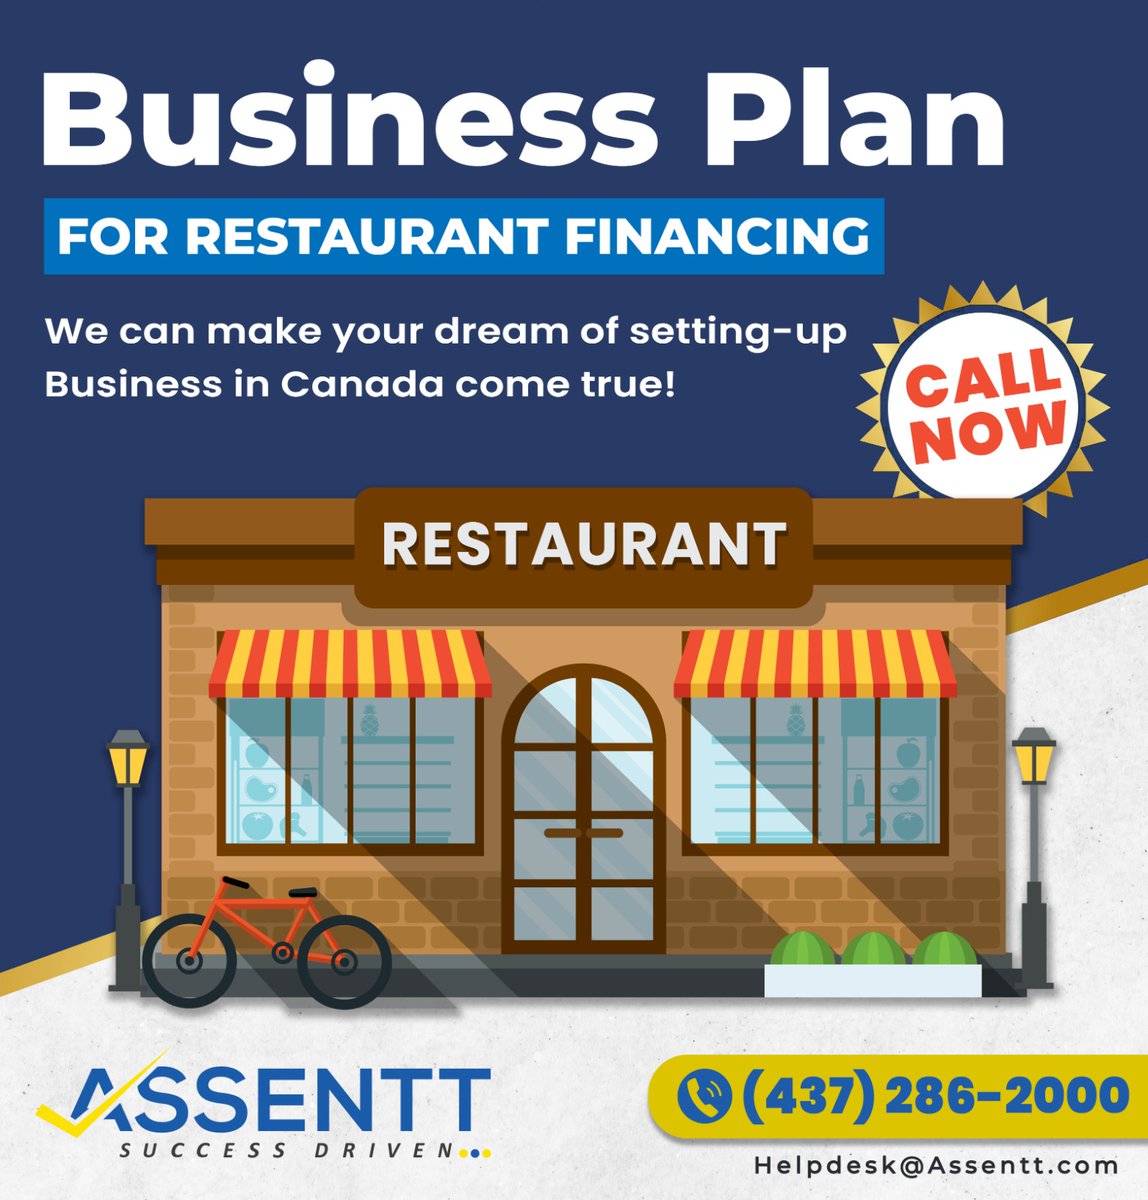 We can make your Dream come True of setting up Restaurant Business in Canada. Approach banks with confidence for your required funding with our BUSINESS PLAN.

#CPA #BALBIRSINGHSAINI #ASSENTT #5starreview  #businessplan #healthcare #deadline #taxday2023  #corporationtax